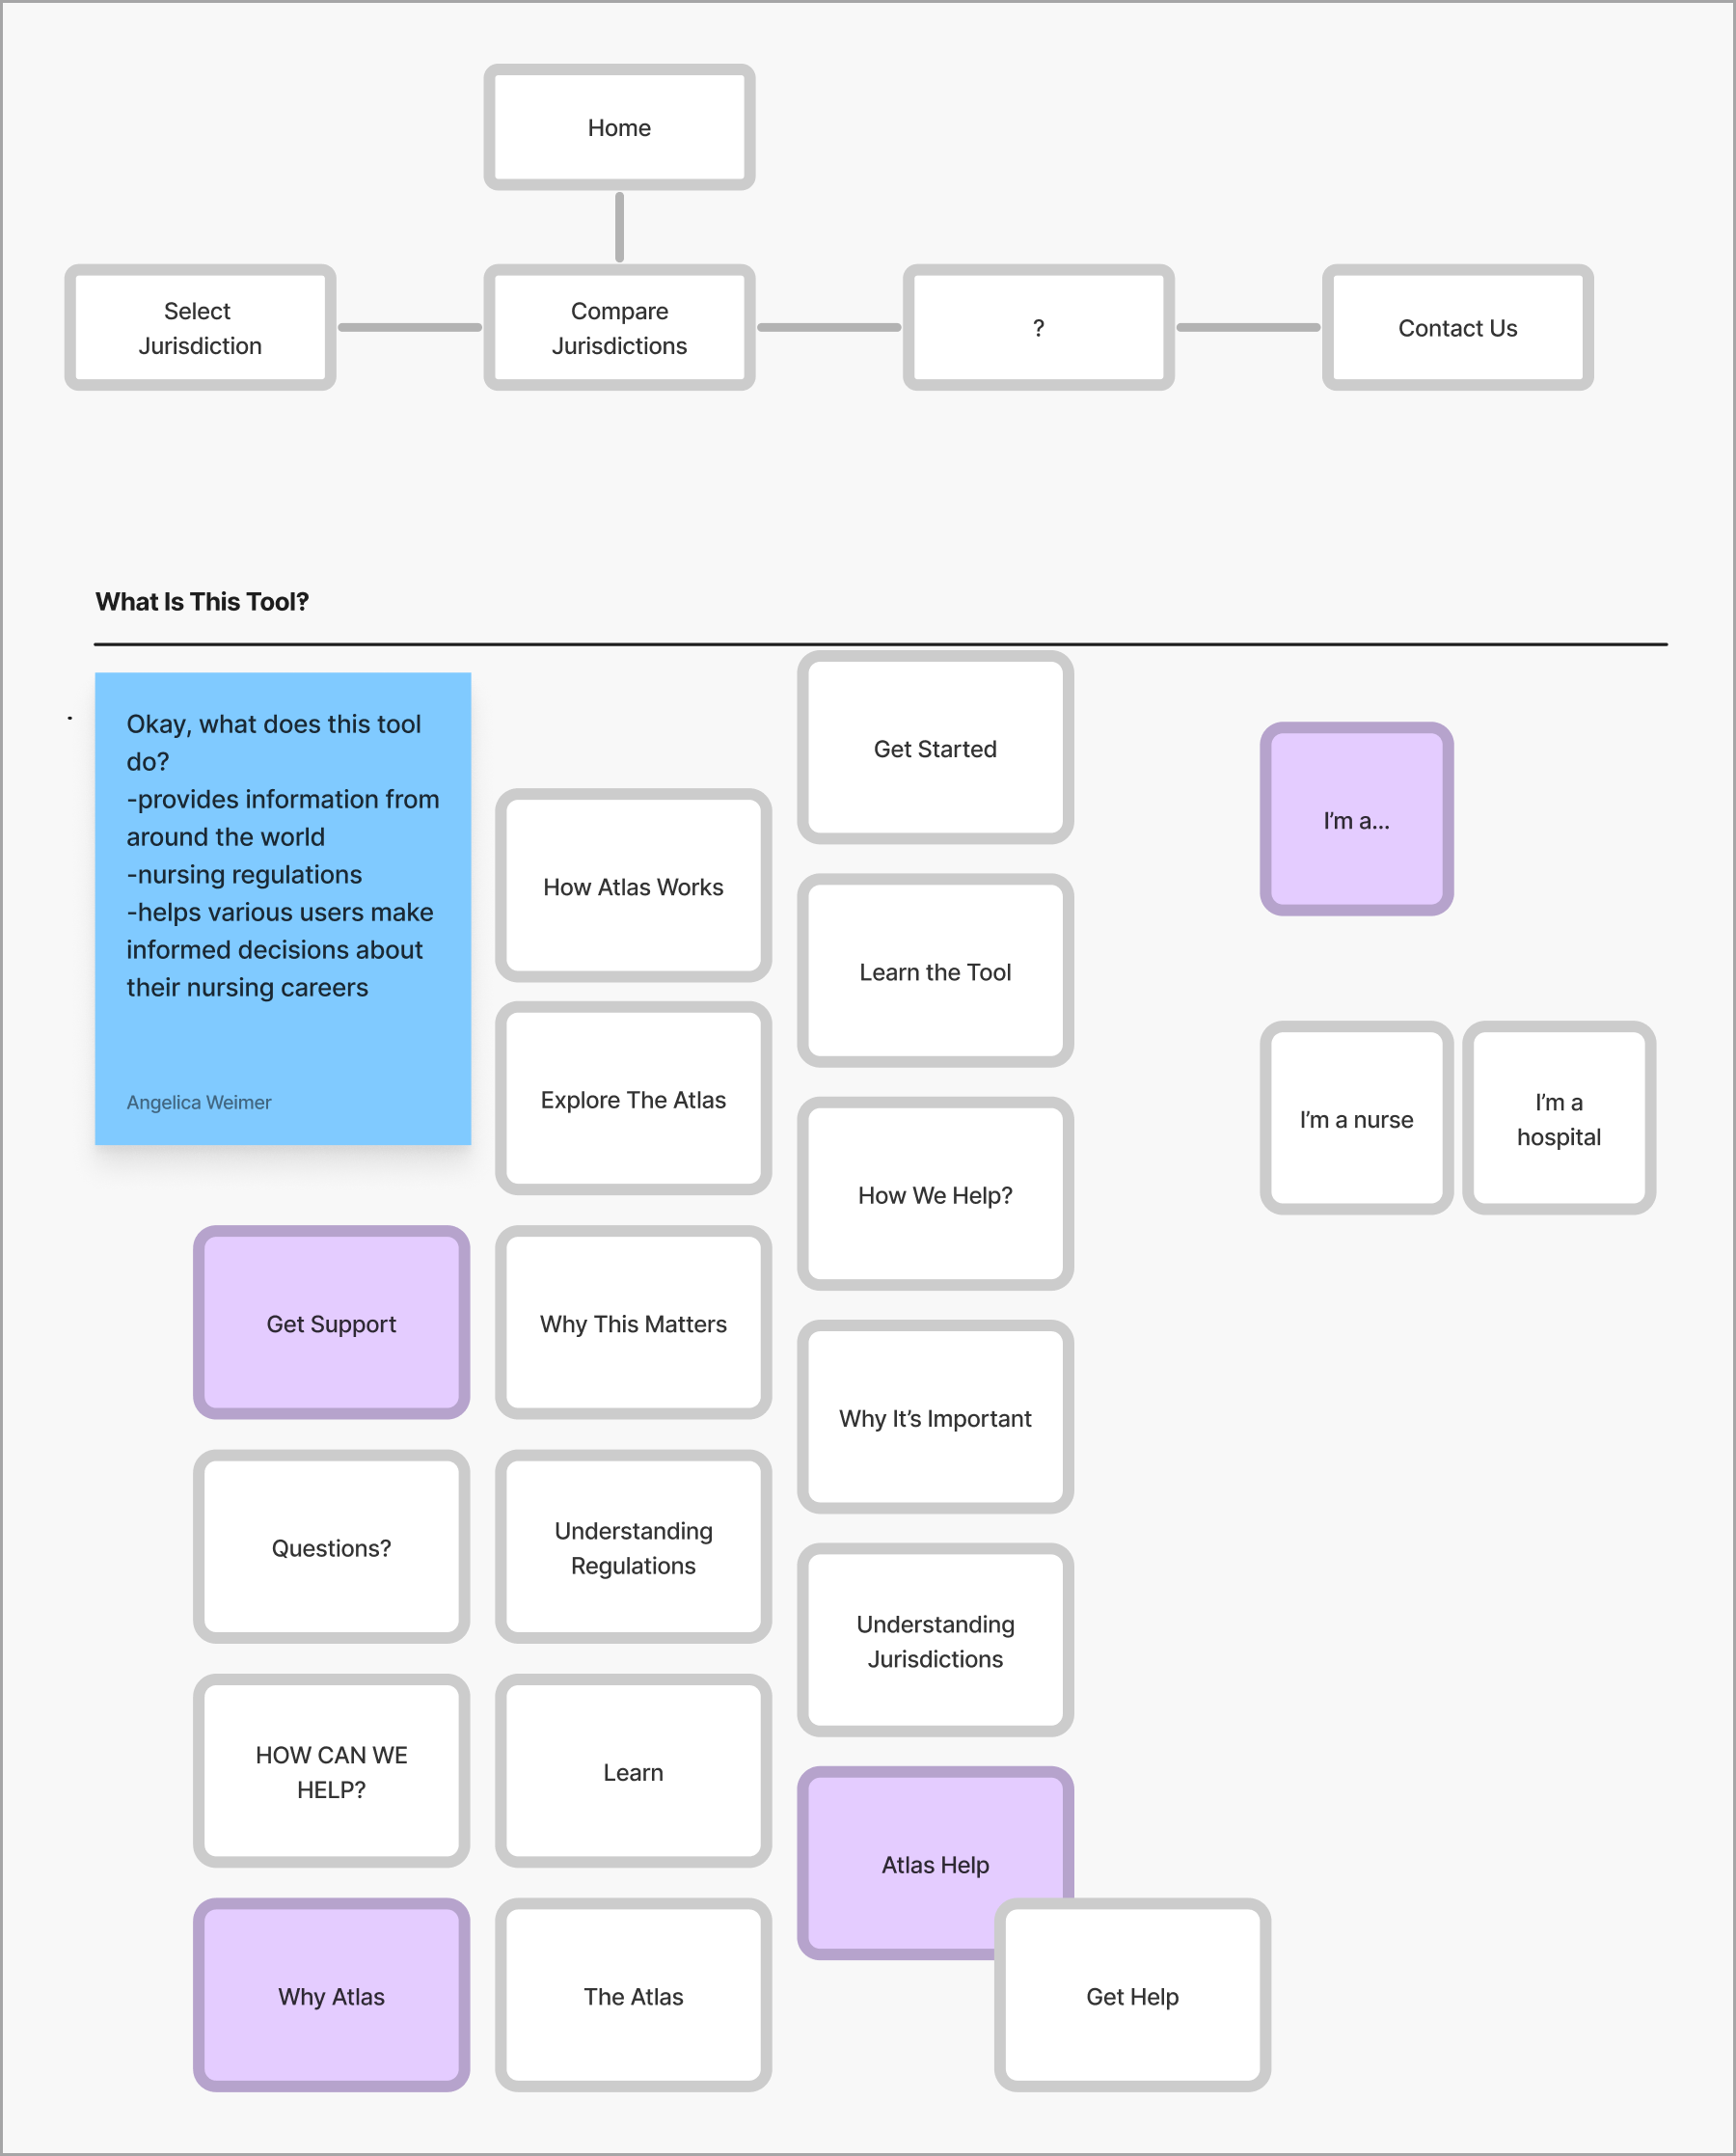 A screenshot of the brainstorming process, within Figjam, used to create the sitemap for the microsite.